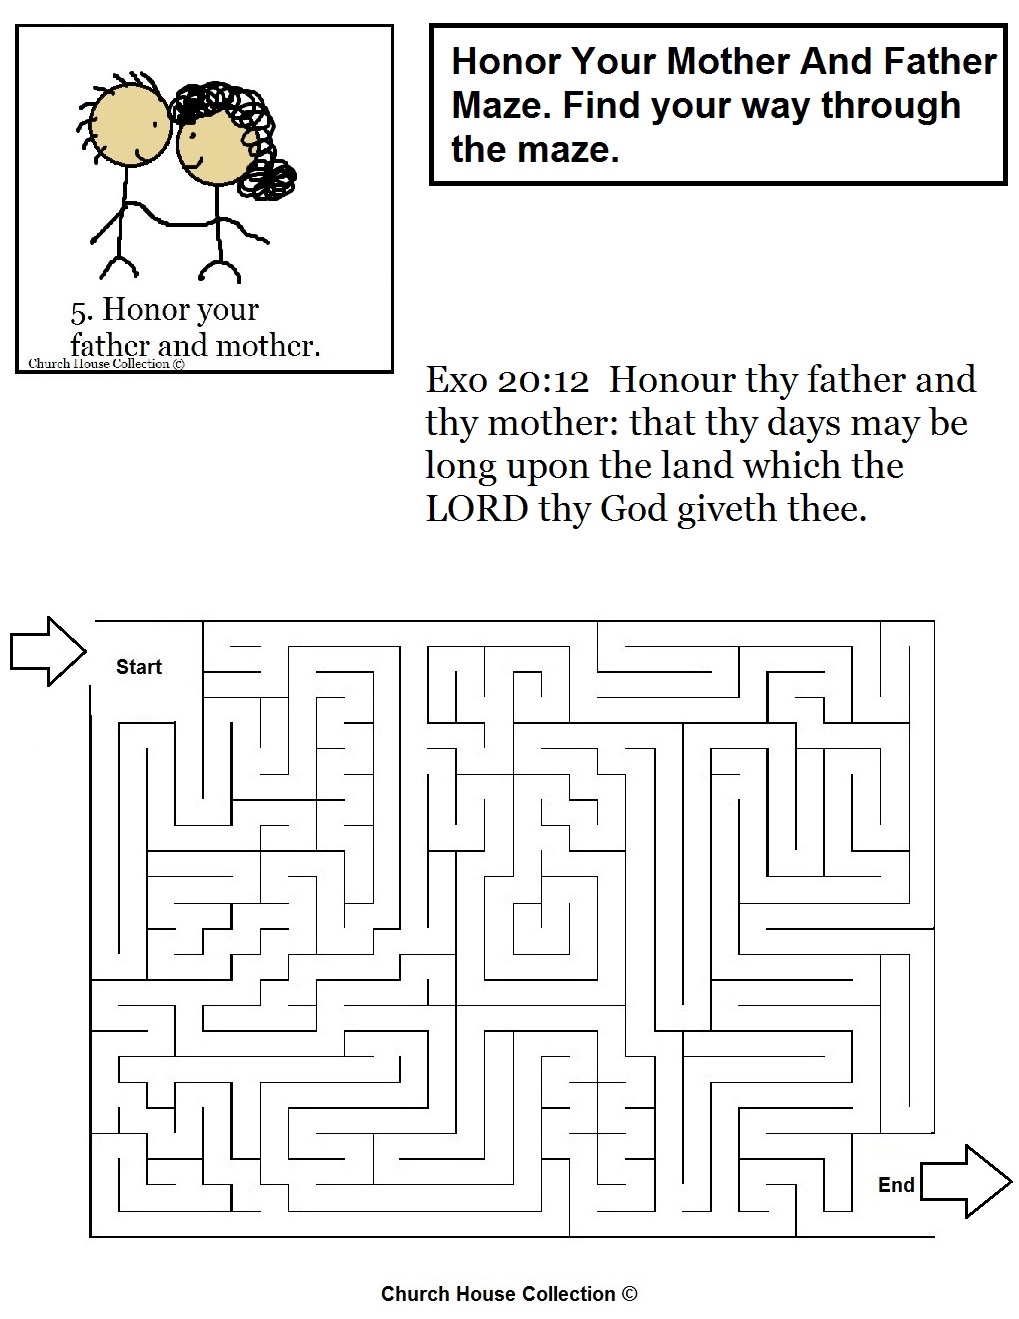 Honor Thy Mother and Father Ten Commandments Maze